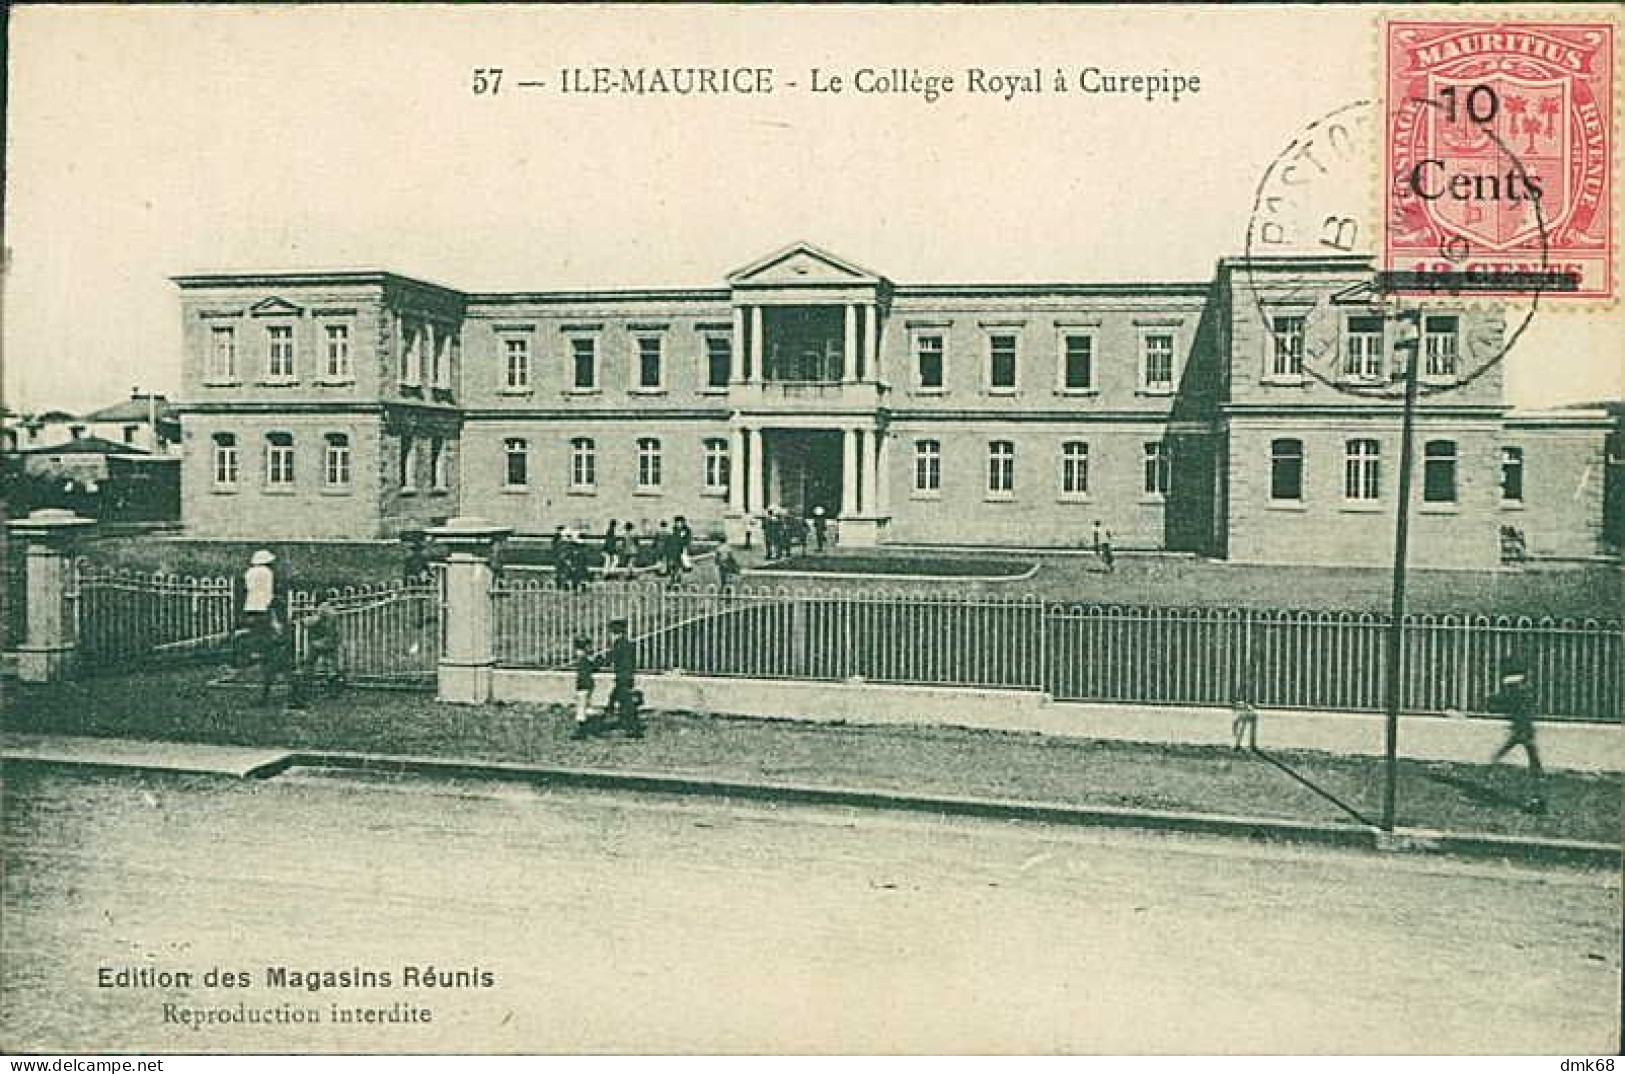 MAURITIUS / ILE MAURICE - LE COLLEGE ROYAL A CUREPIPE - EDIT. MAGASINS REUNIS - MAILED 1926 / OVERPRINT STAMP (12577) - Mauritius